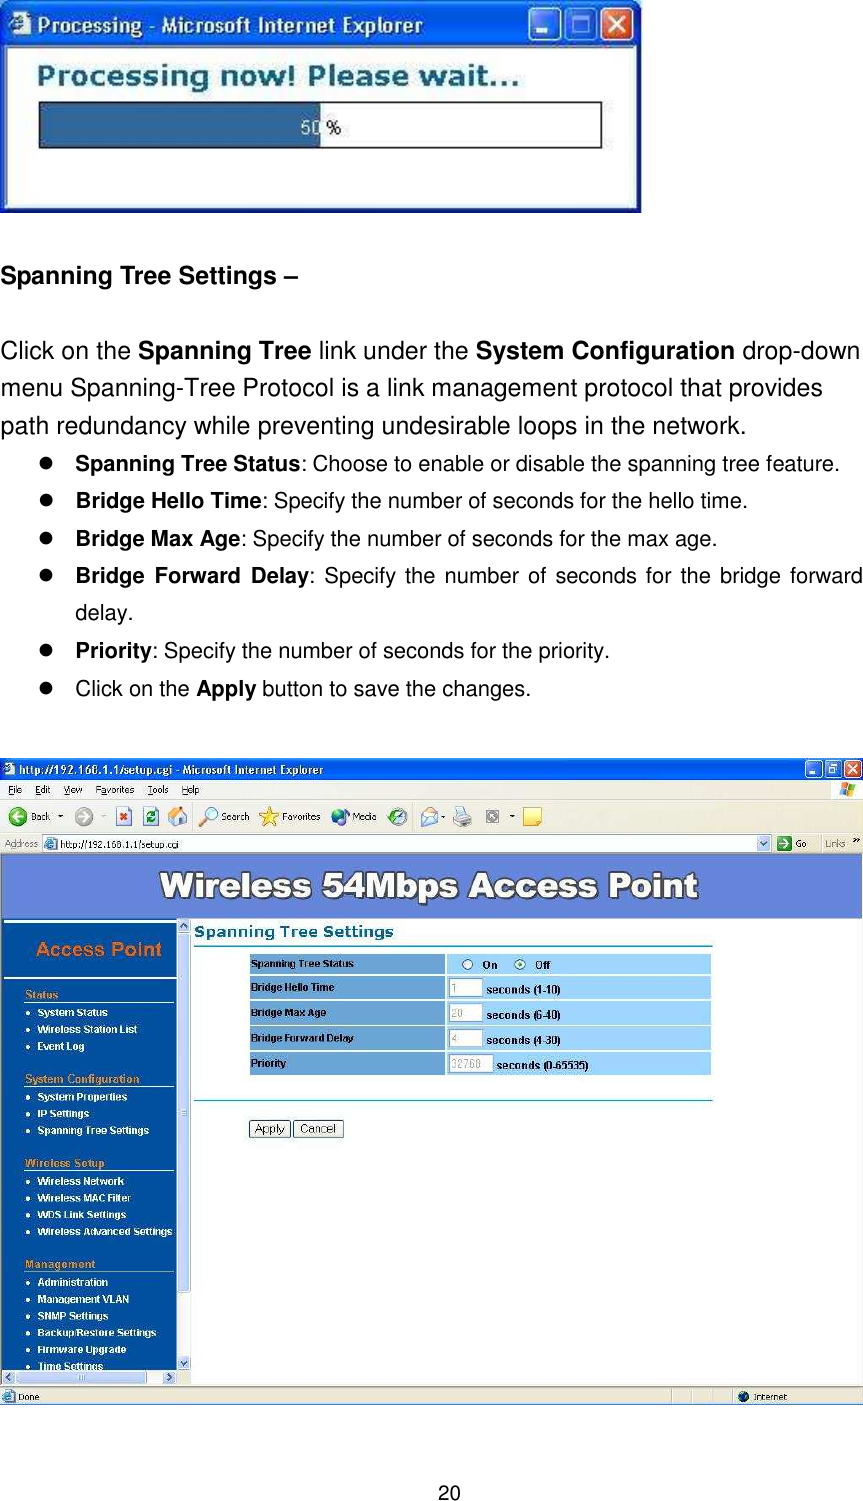  20   Spanning Tree Settings –    Click on the Spanning Tree link under the System Configuration drop-down menu Spanning-Tree Protocol is a link management protocol that provides path redundancy while preventing undesirable loops in the network.  Spanning Tree Status: Choose to enable or disable the spanning tree feature.    Bridge Hello Time: Specify the number of seconds for the hello time.   Bridge Max Age: Specify the number of seconds for the max age.    Bridge Forward  Delay: Specify the number of seconds for the bridge forward delay.   Priority: Specify the number of seconds for the priority.    Click on the Apply button to save the changes.    